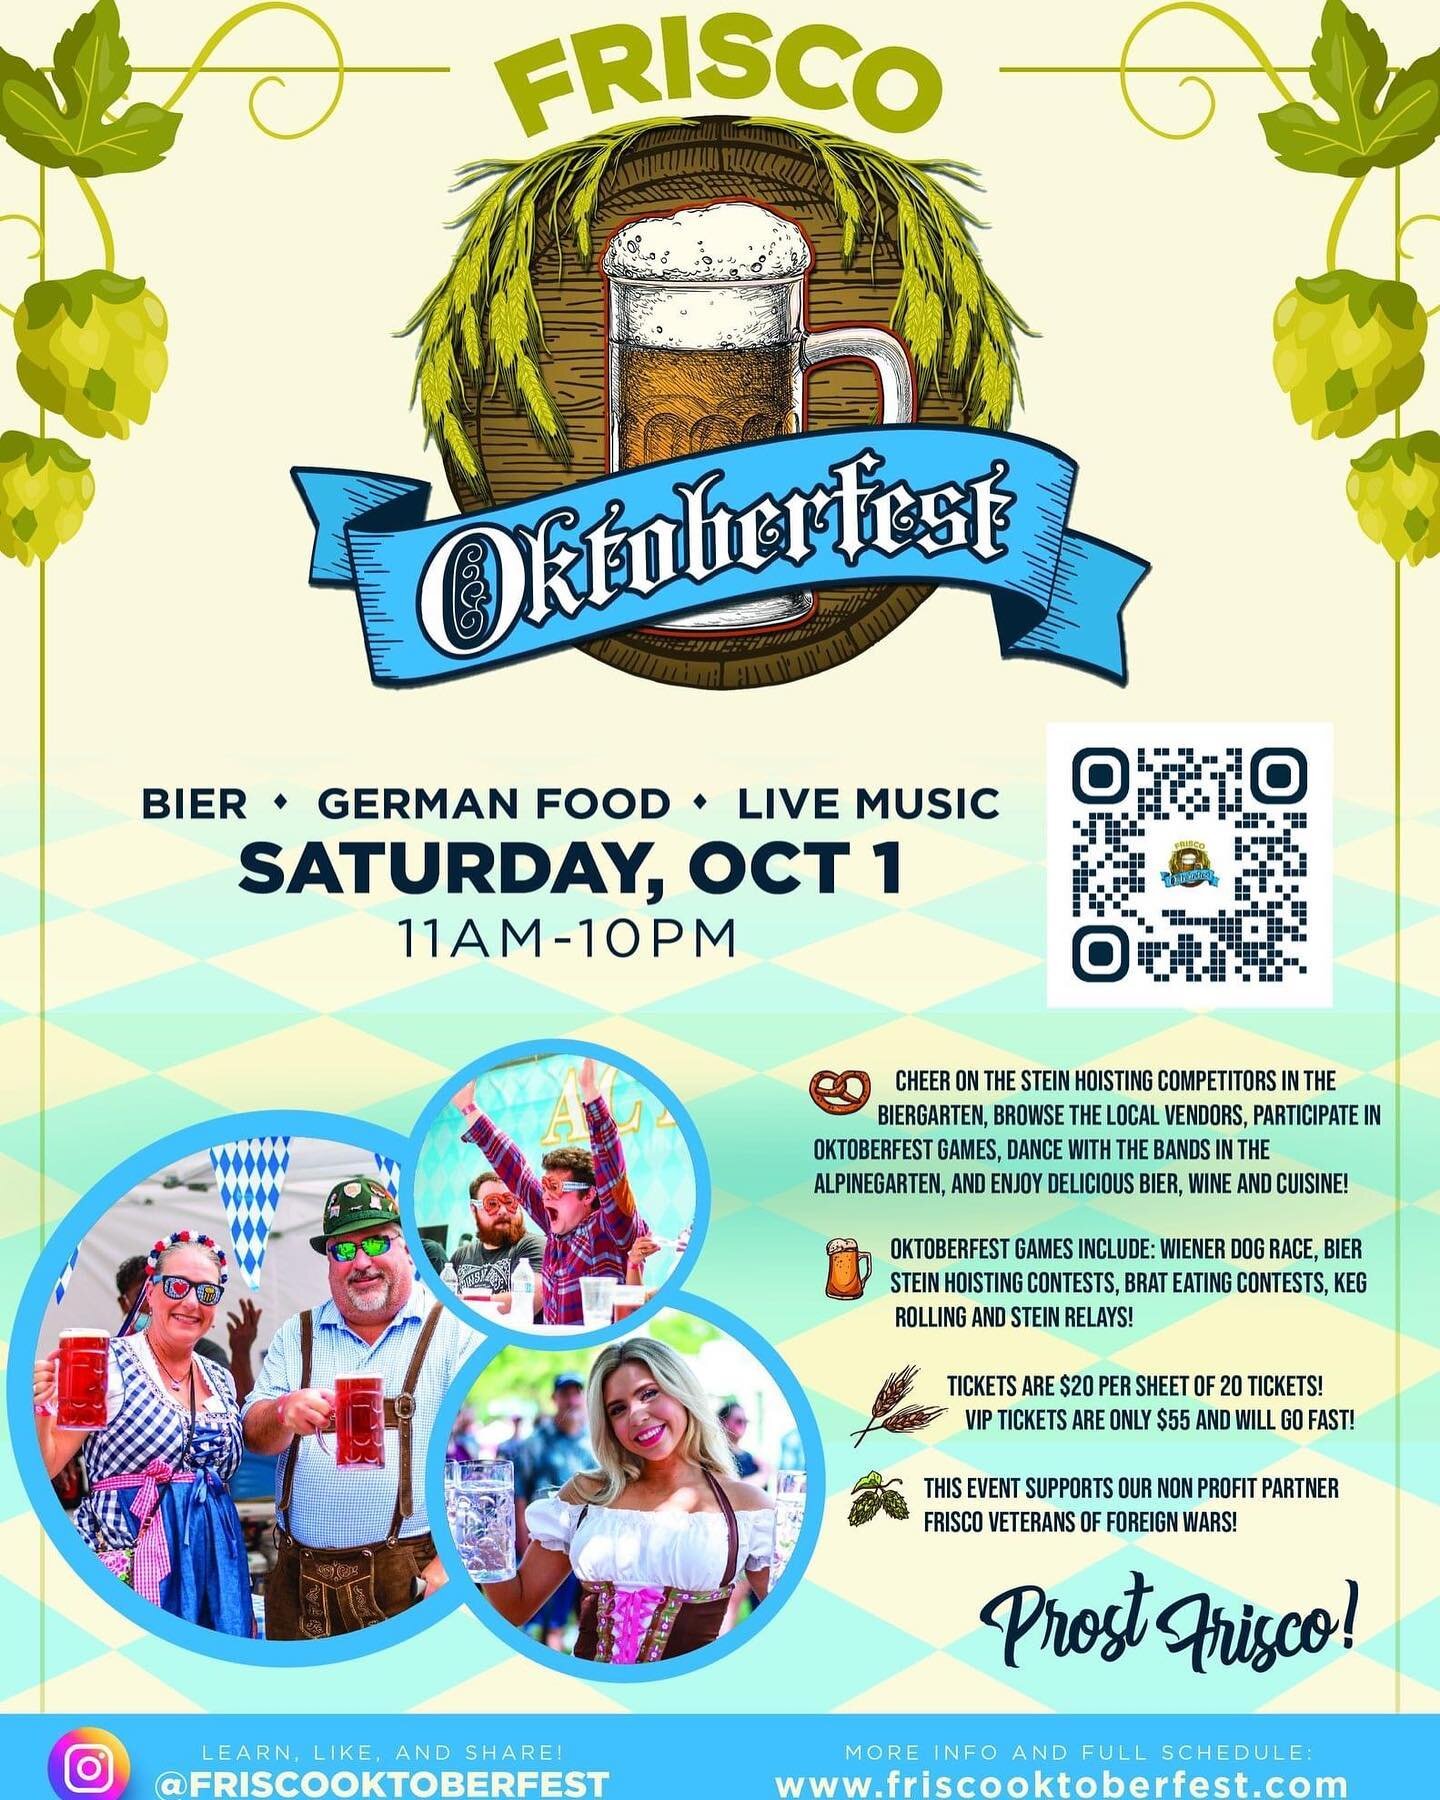 FIVE days out from Frisco Oktoberfest! 😁🍻

Check out the entertainment lineup below! 🎼🎸Join us in Frisco Square from 11am-10pm for tons of FUN! 🍻✨ You do not want to miss out on the food, activities, entertainment, and BEIR! 

Get your tickets t